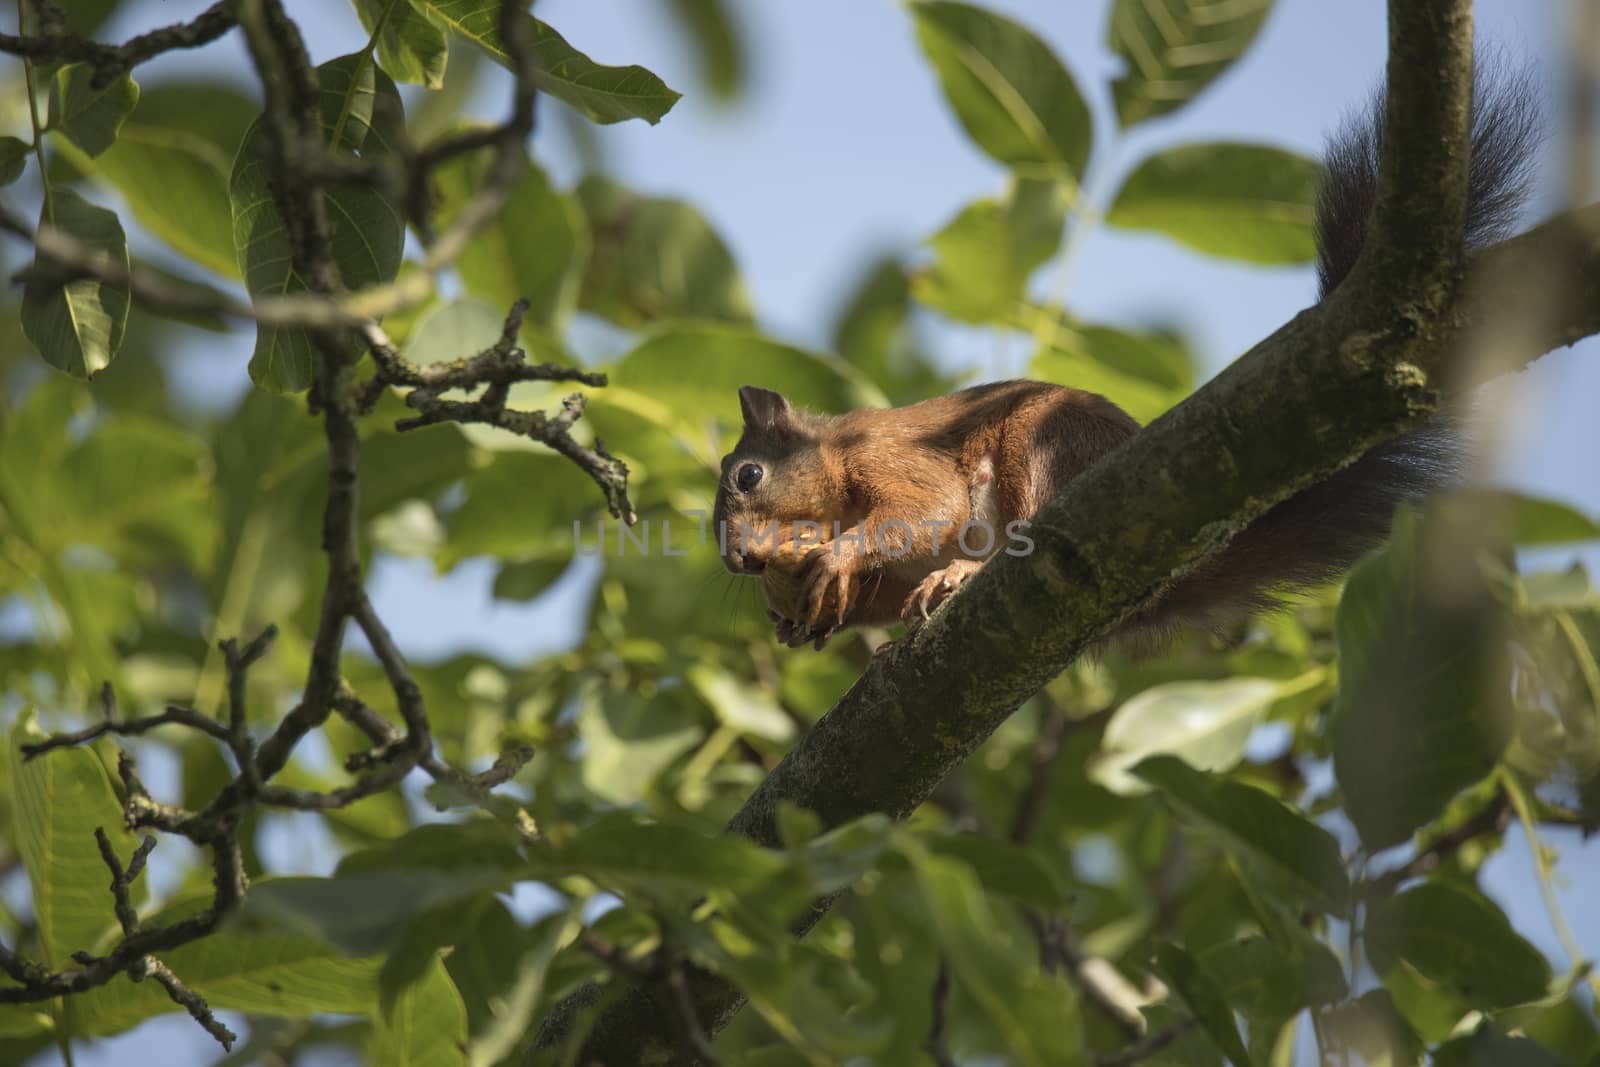 Squirrel sitting in a tree eating a nut by avanheertum